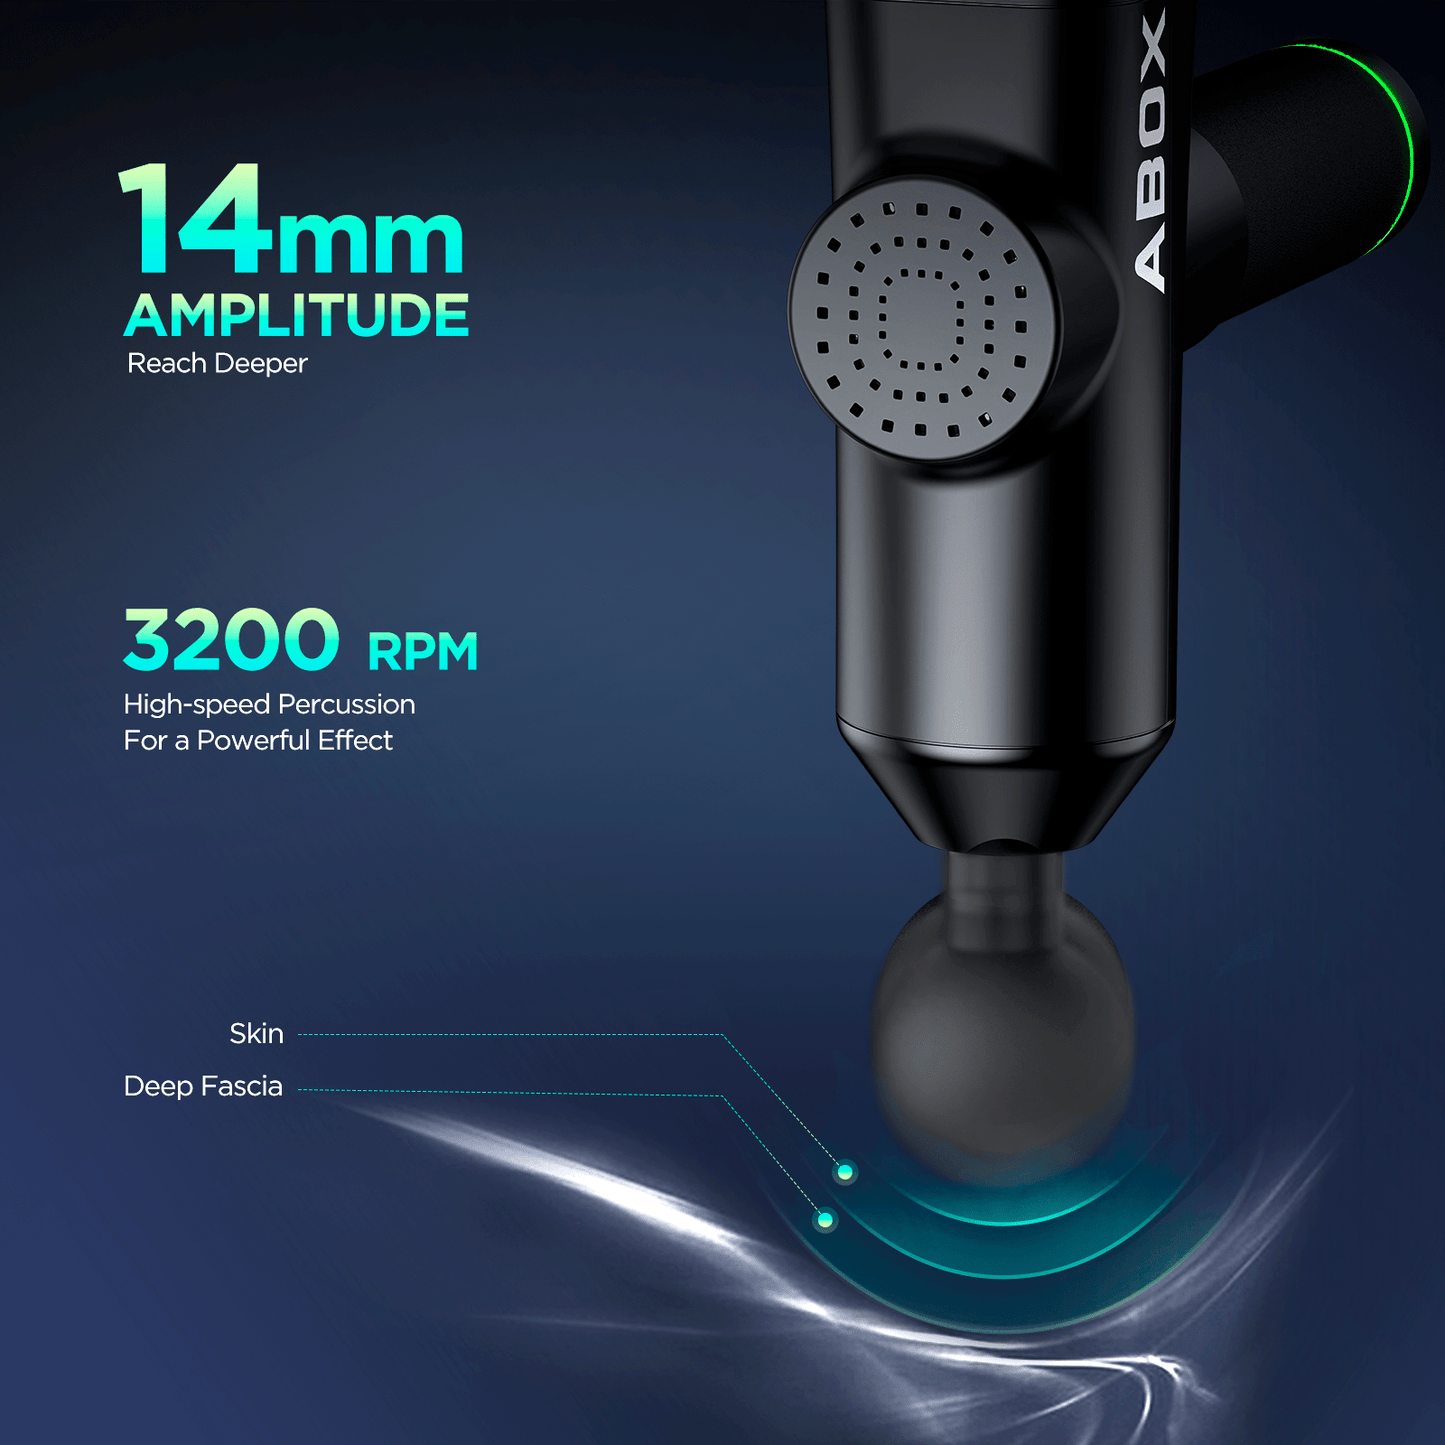 ABOX High Power Touch Screen Massage Gun Hero 1 With 6 Heads 30 Vibration Speed 10 Hours Battery Skin friendly ABS material